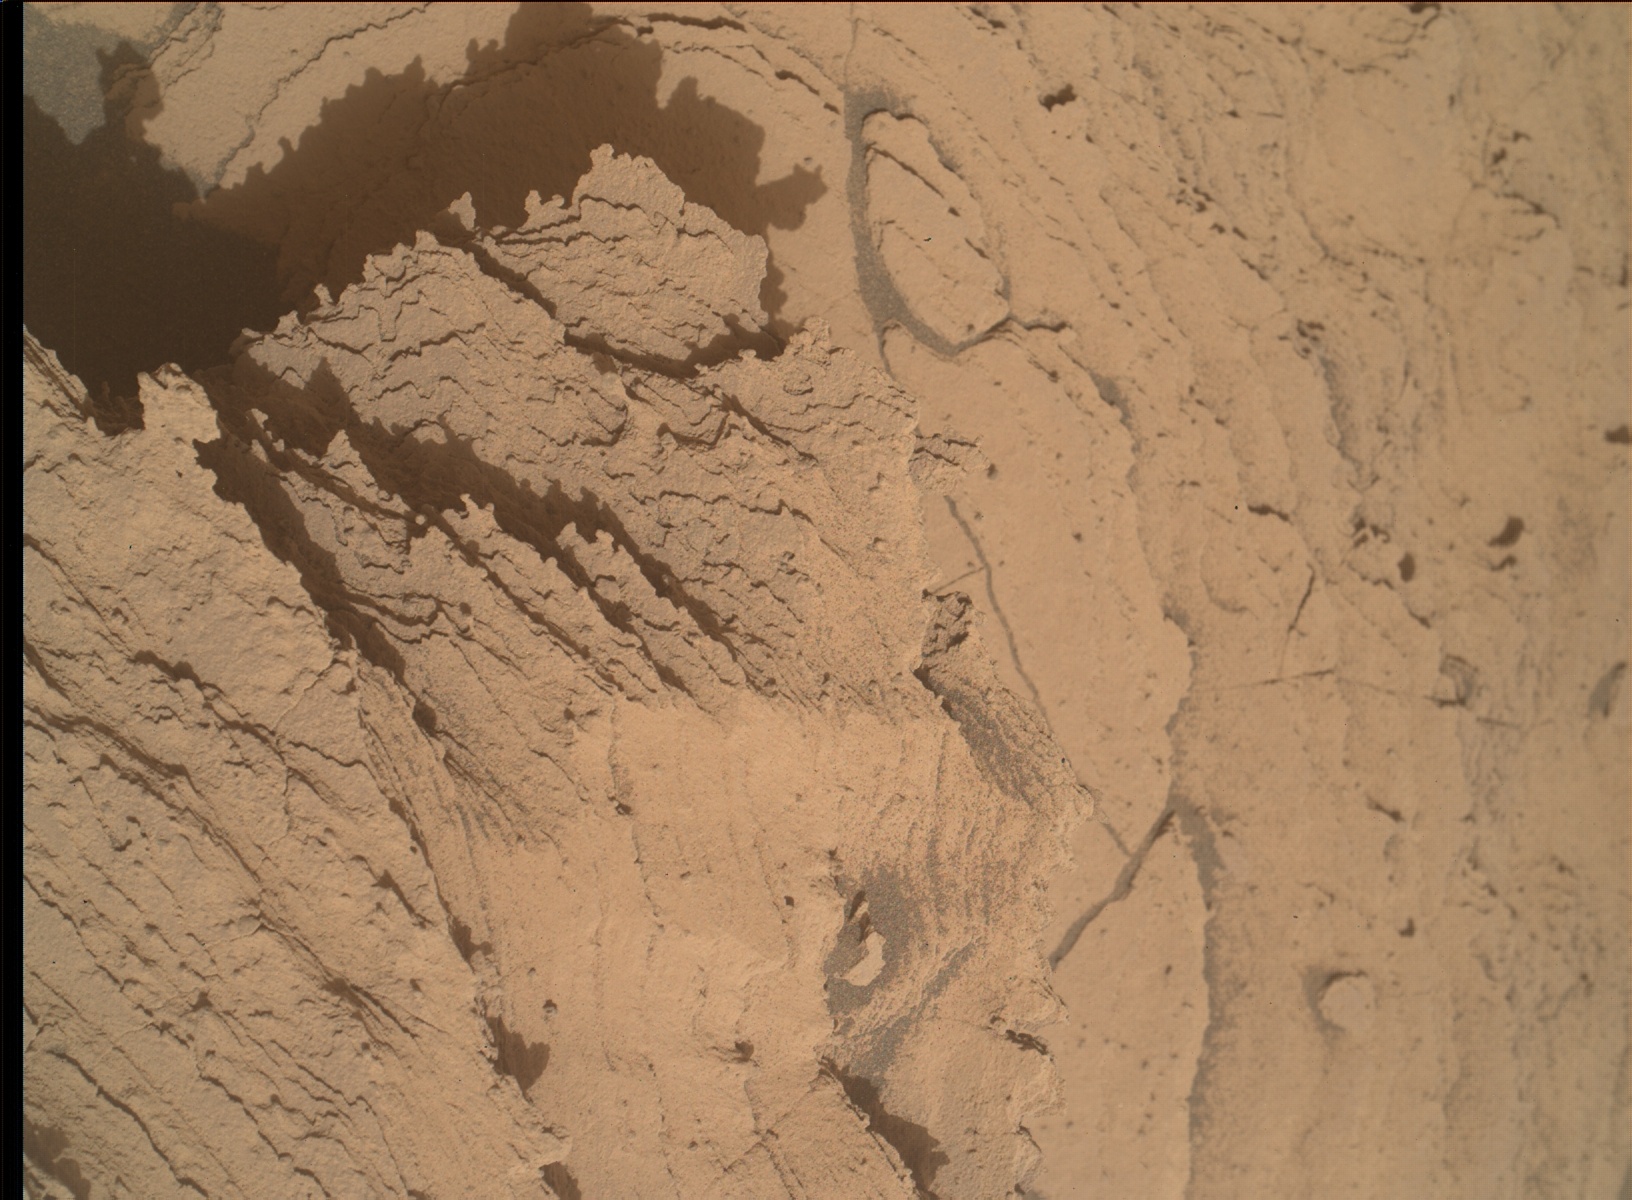 NASA's Mars rover Curiosity acquired this image using its Mars Hand Lens Imager (MAHLI), located on the turret at the end of the rover's robotic arm, on May 7, 2024, Sol 4178 of the Mars Science Laboratory Mission, at 23:20:40 UTC.